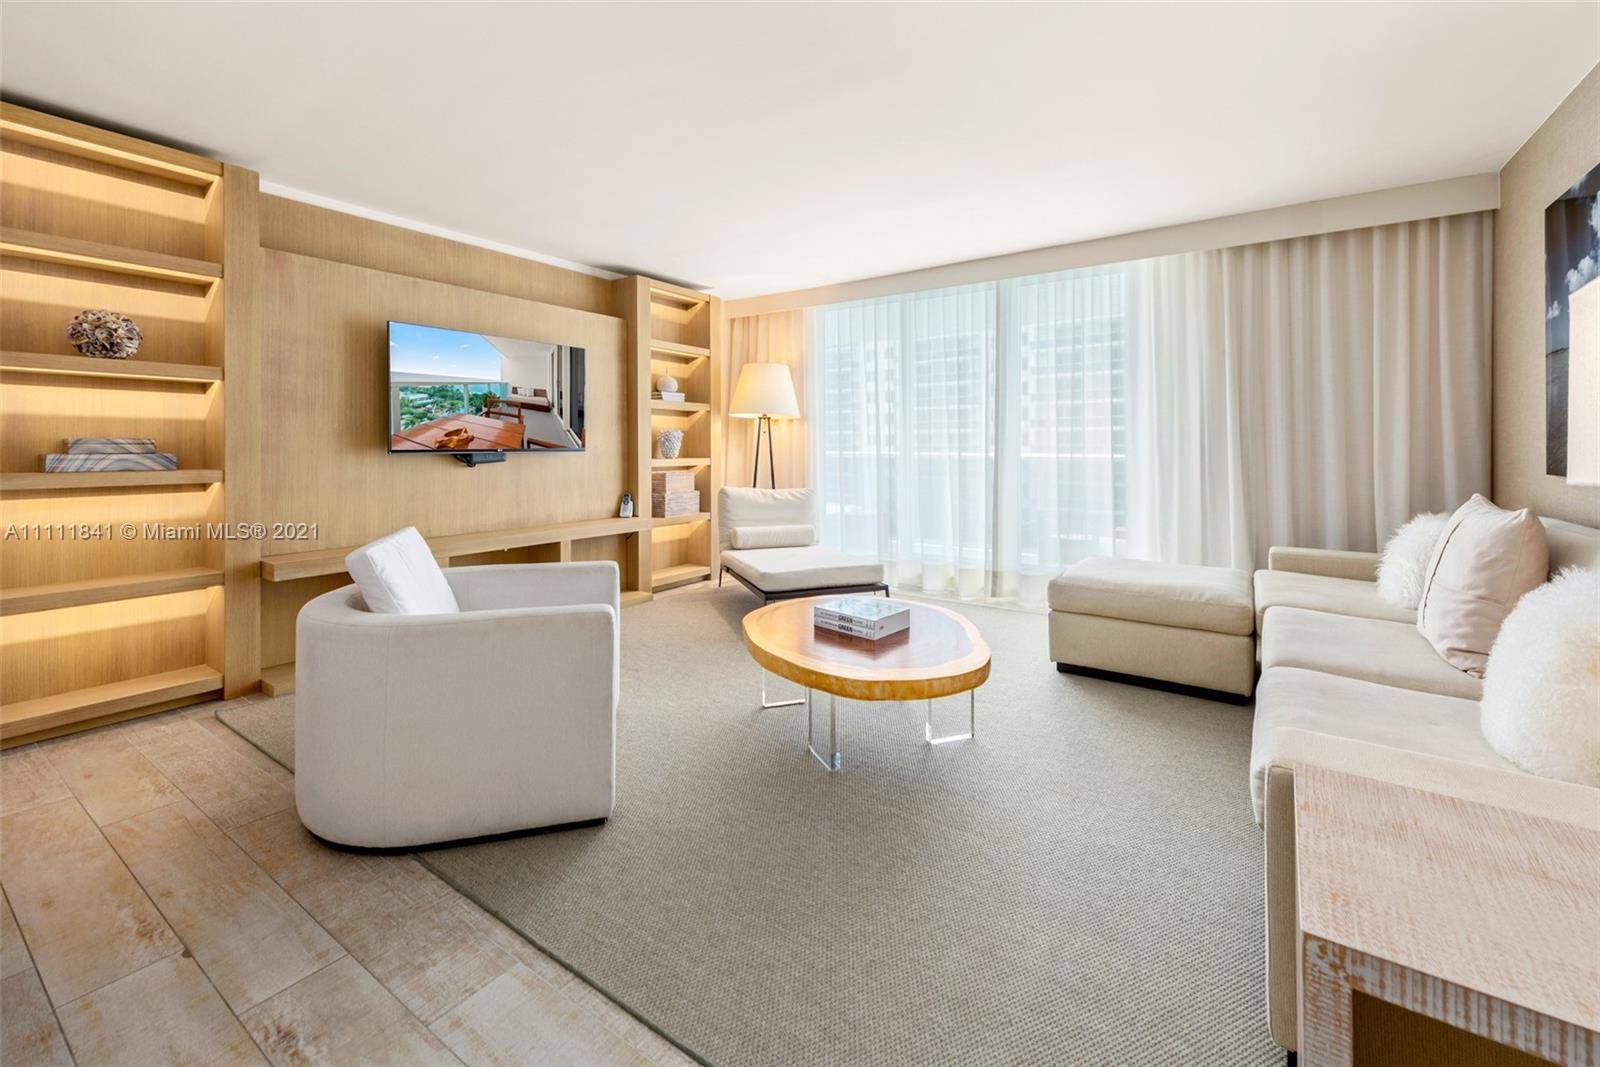 Positioned on the Atlantic Oceanfront with 600 feet of direct beach access, this beachfront private residence is located inside South Beach s eco conscious 1 Hotel Homes.